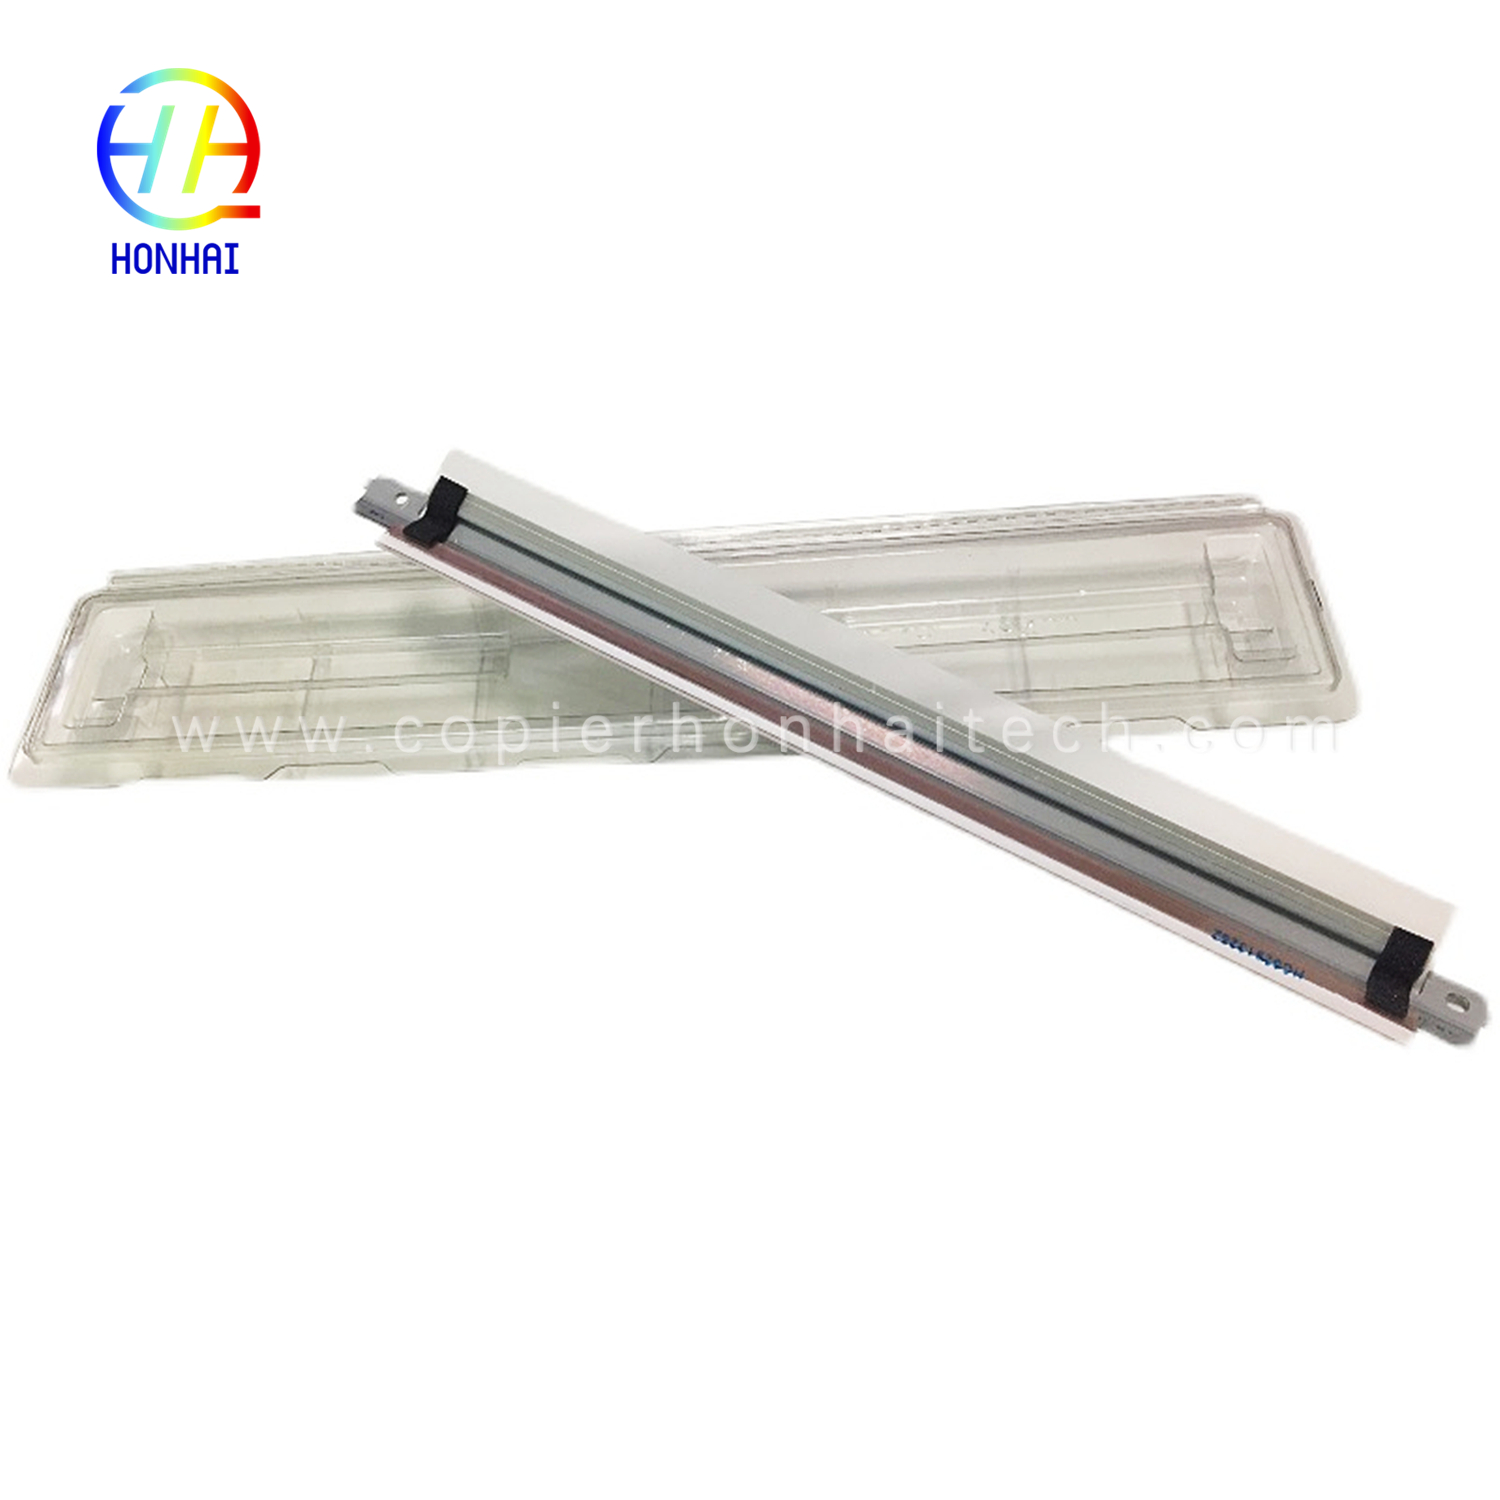 Transfer Belt Cleaning Blade for Xerox DC4110